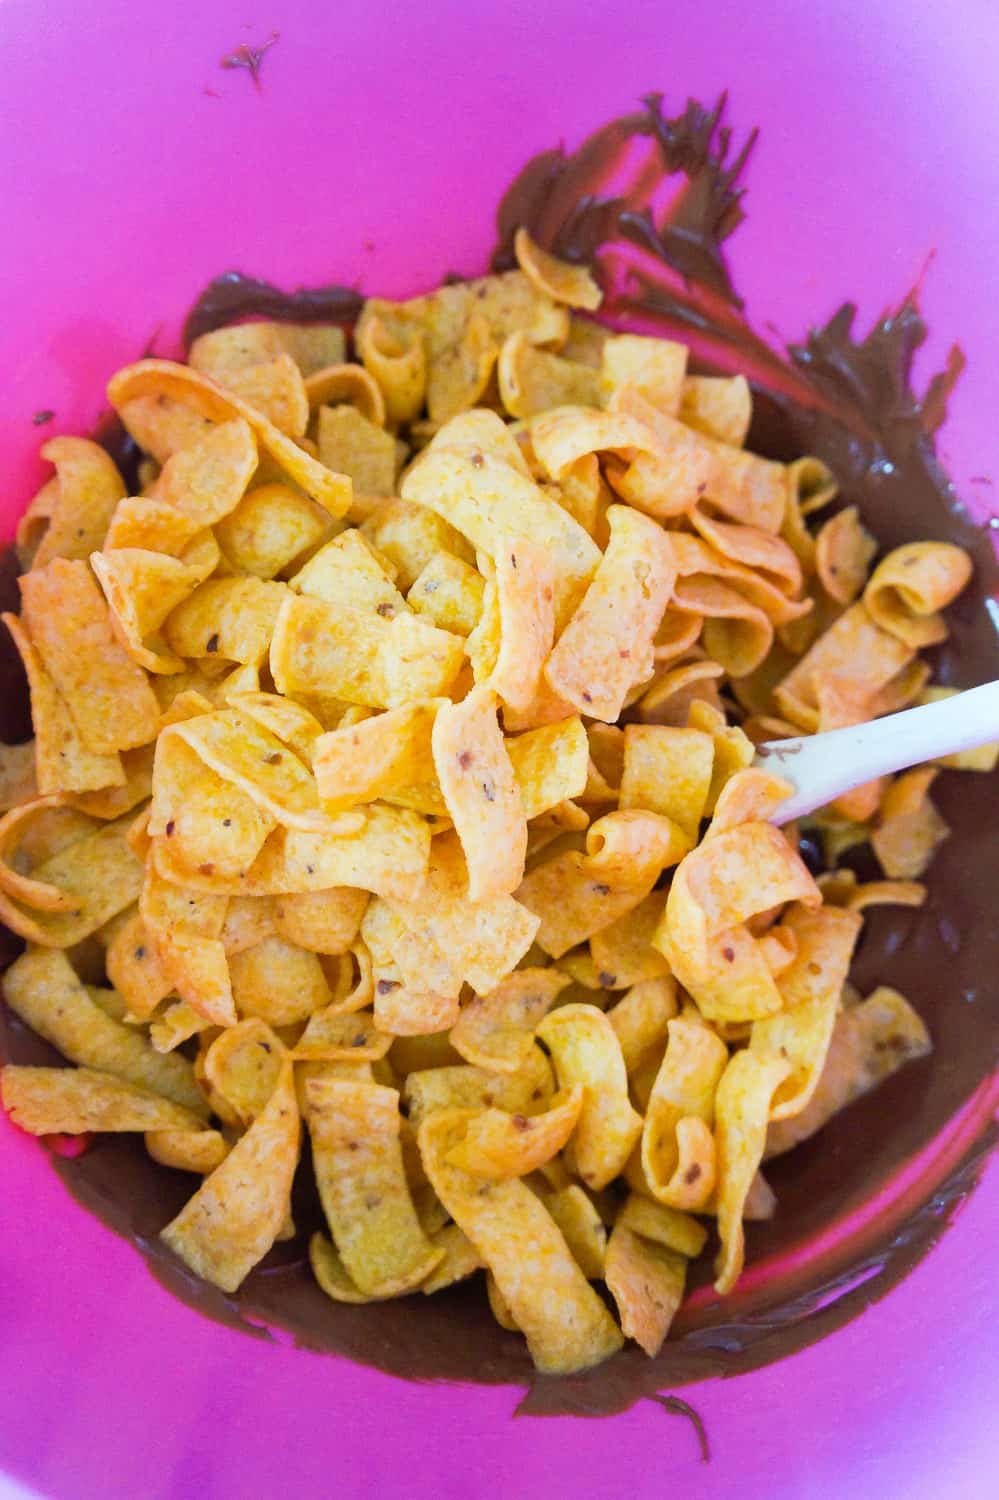 Fritos corn chips on top of melted chocolate in a mixing bowl